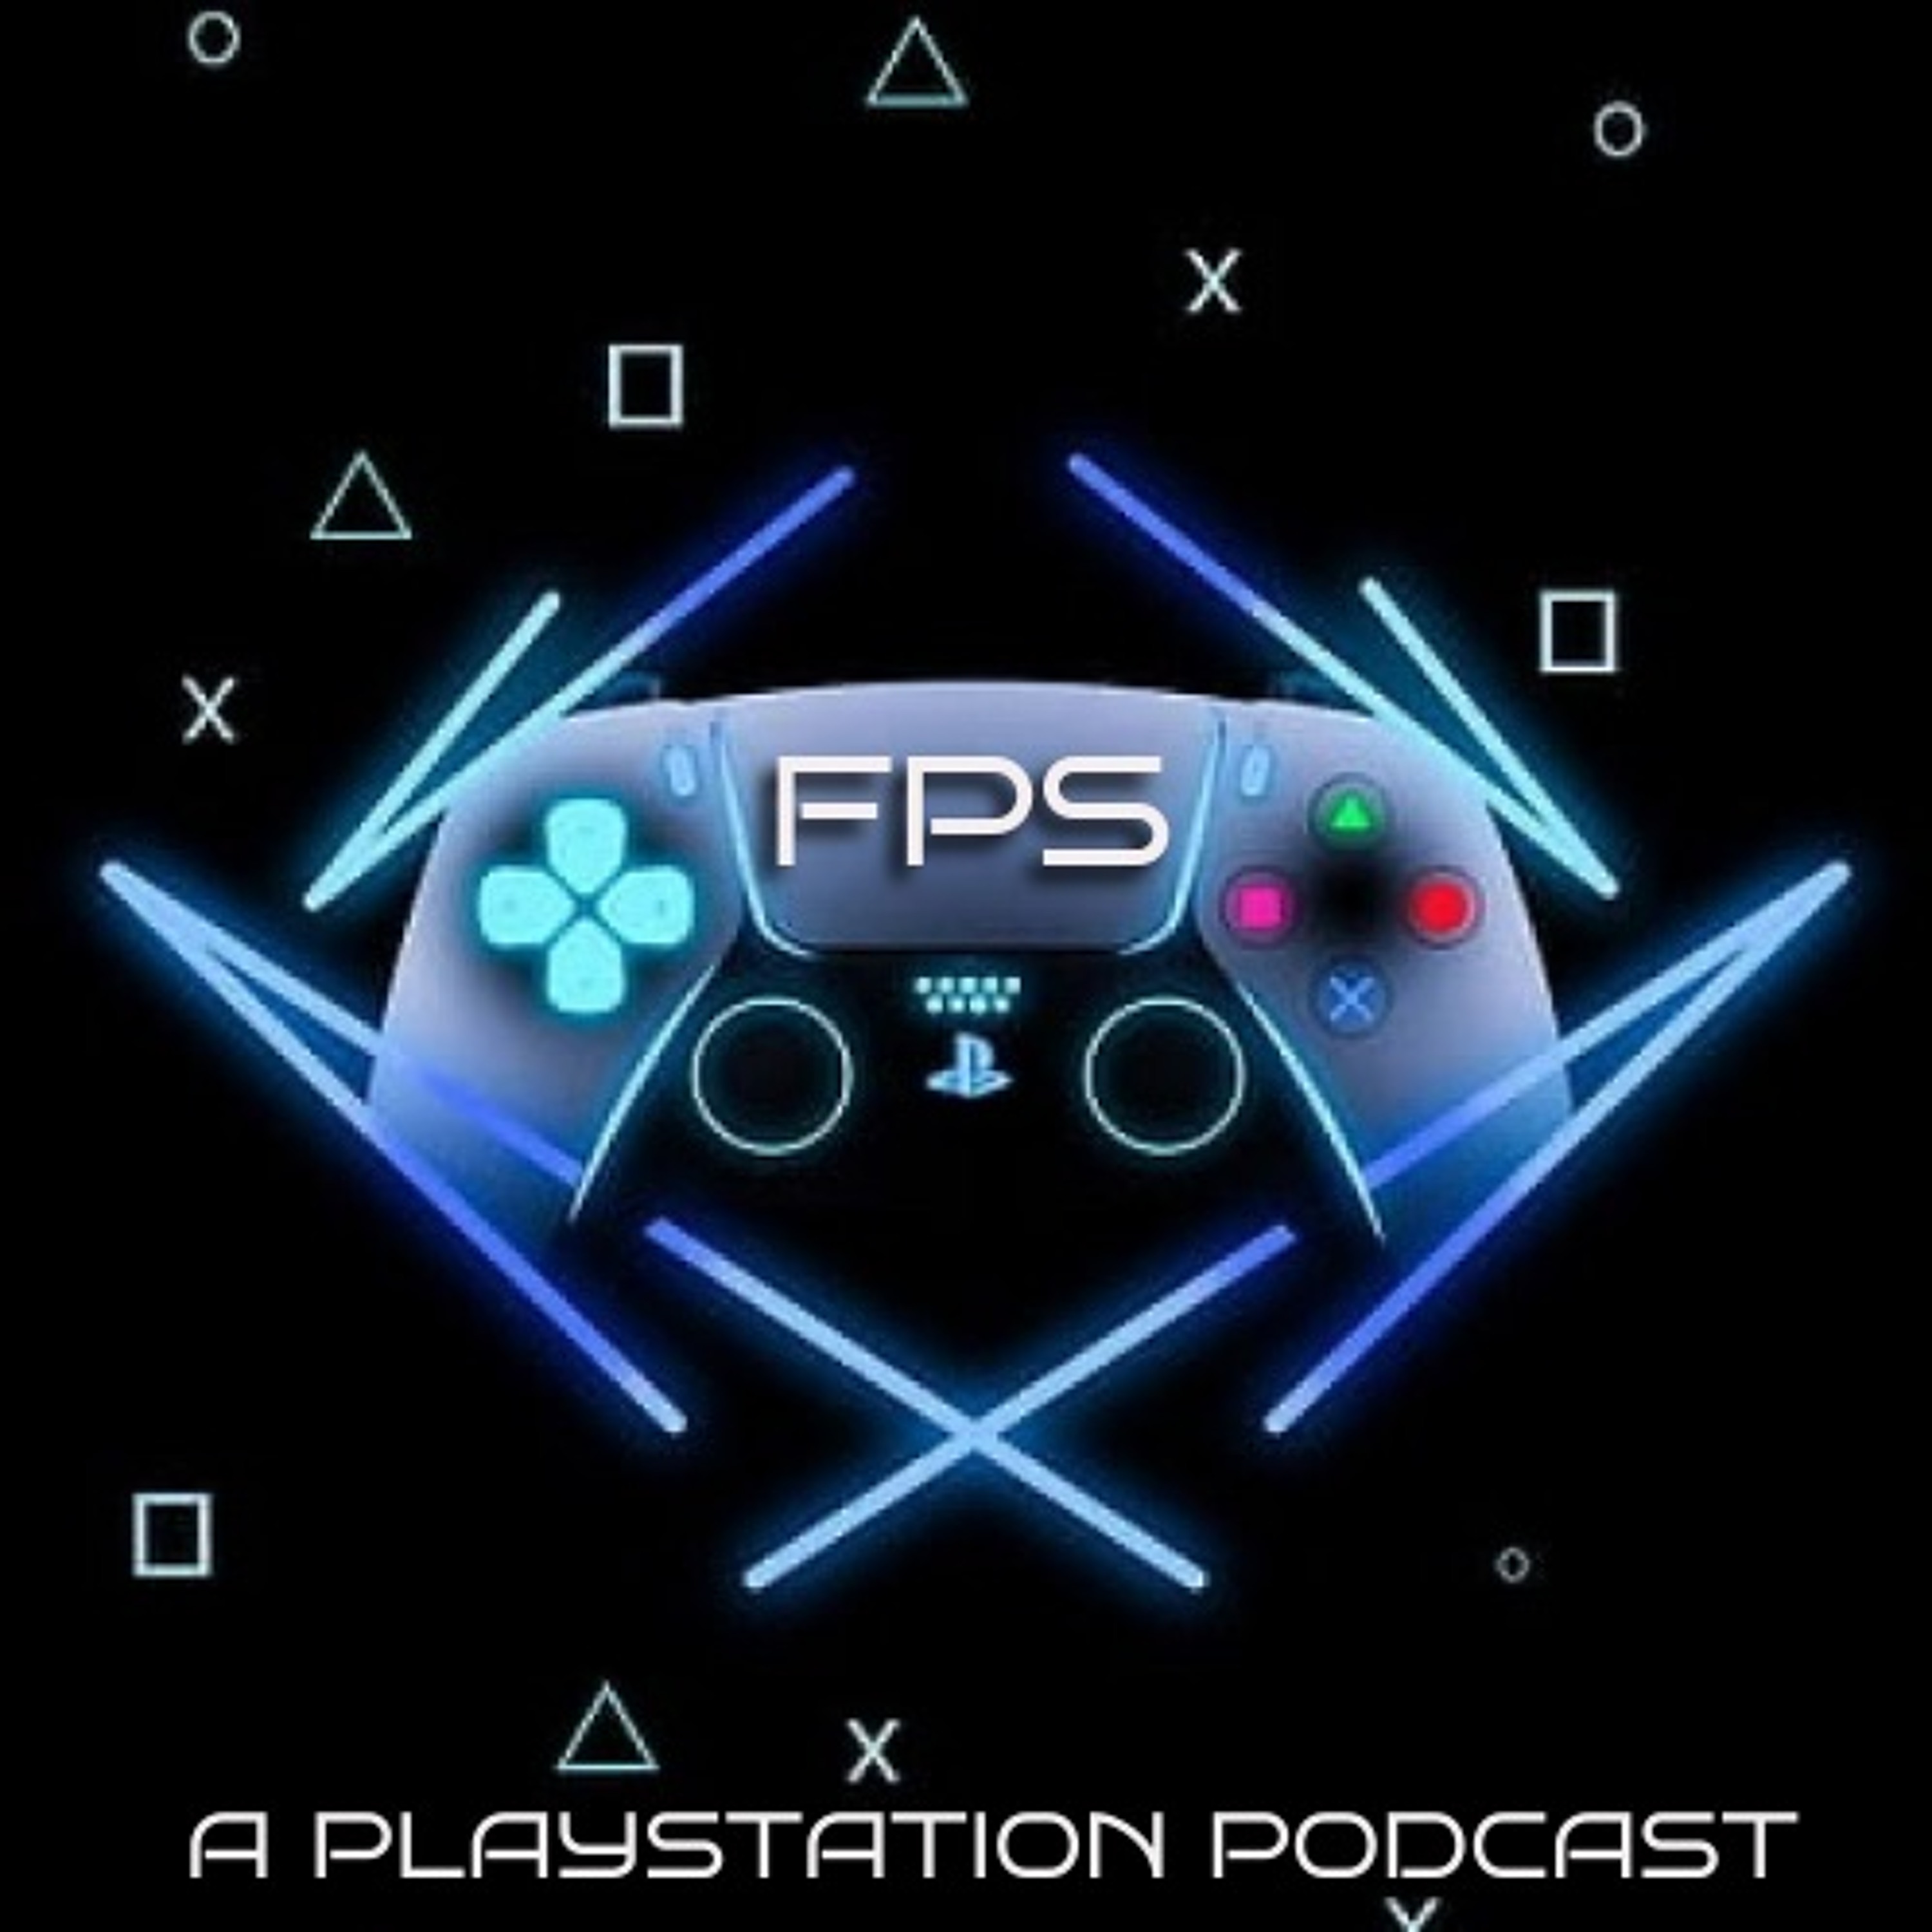 A Father's PlayStation Ep: 190 - Mount Rushmore